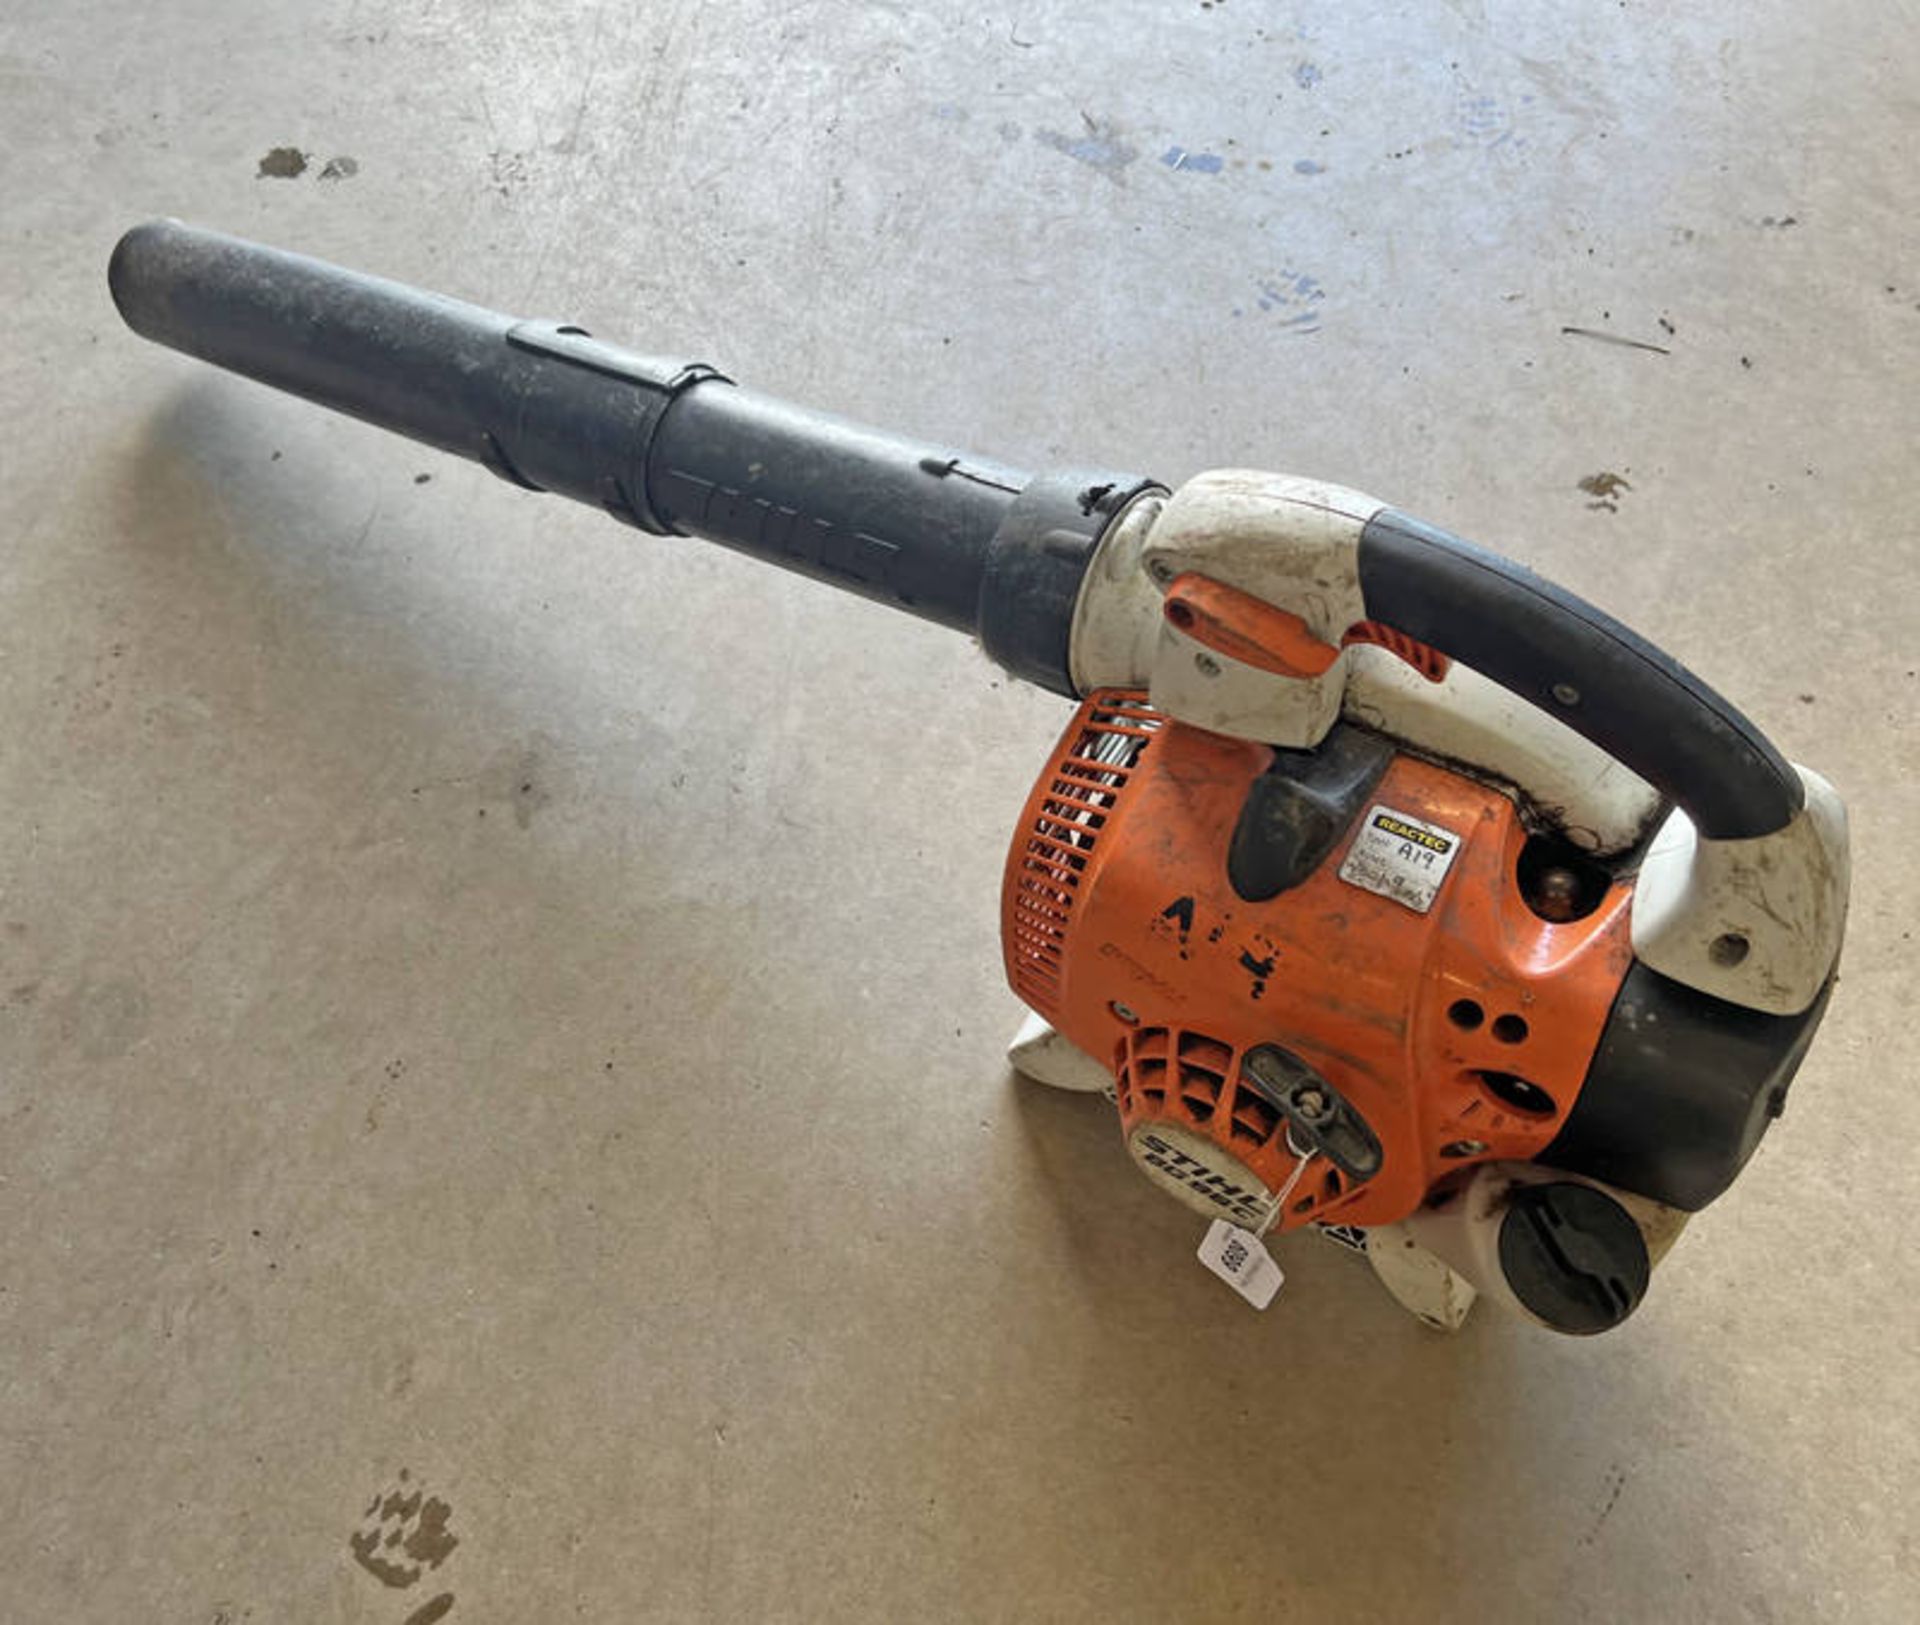 2018 STIHL HAND HELD BLOWER BG86 C-E 27CC HAND HELD LEAF BLOWER **TO BE SOLD PLUS VAT ON THE